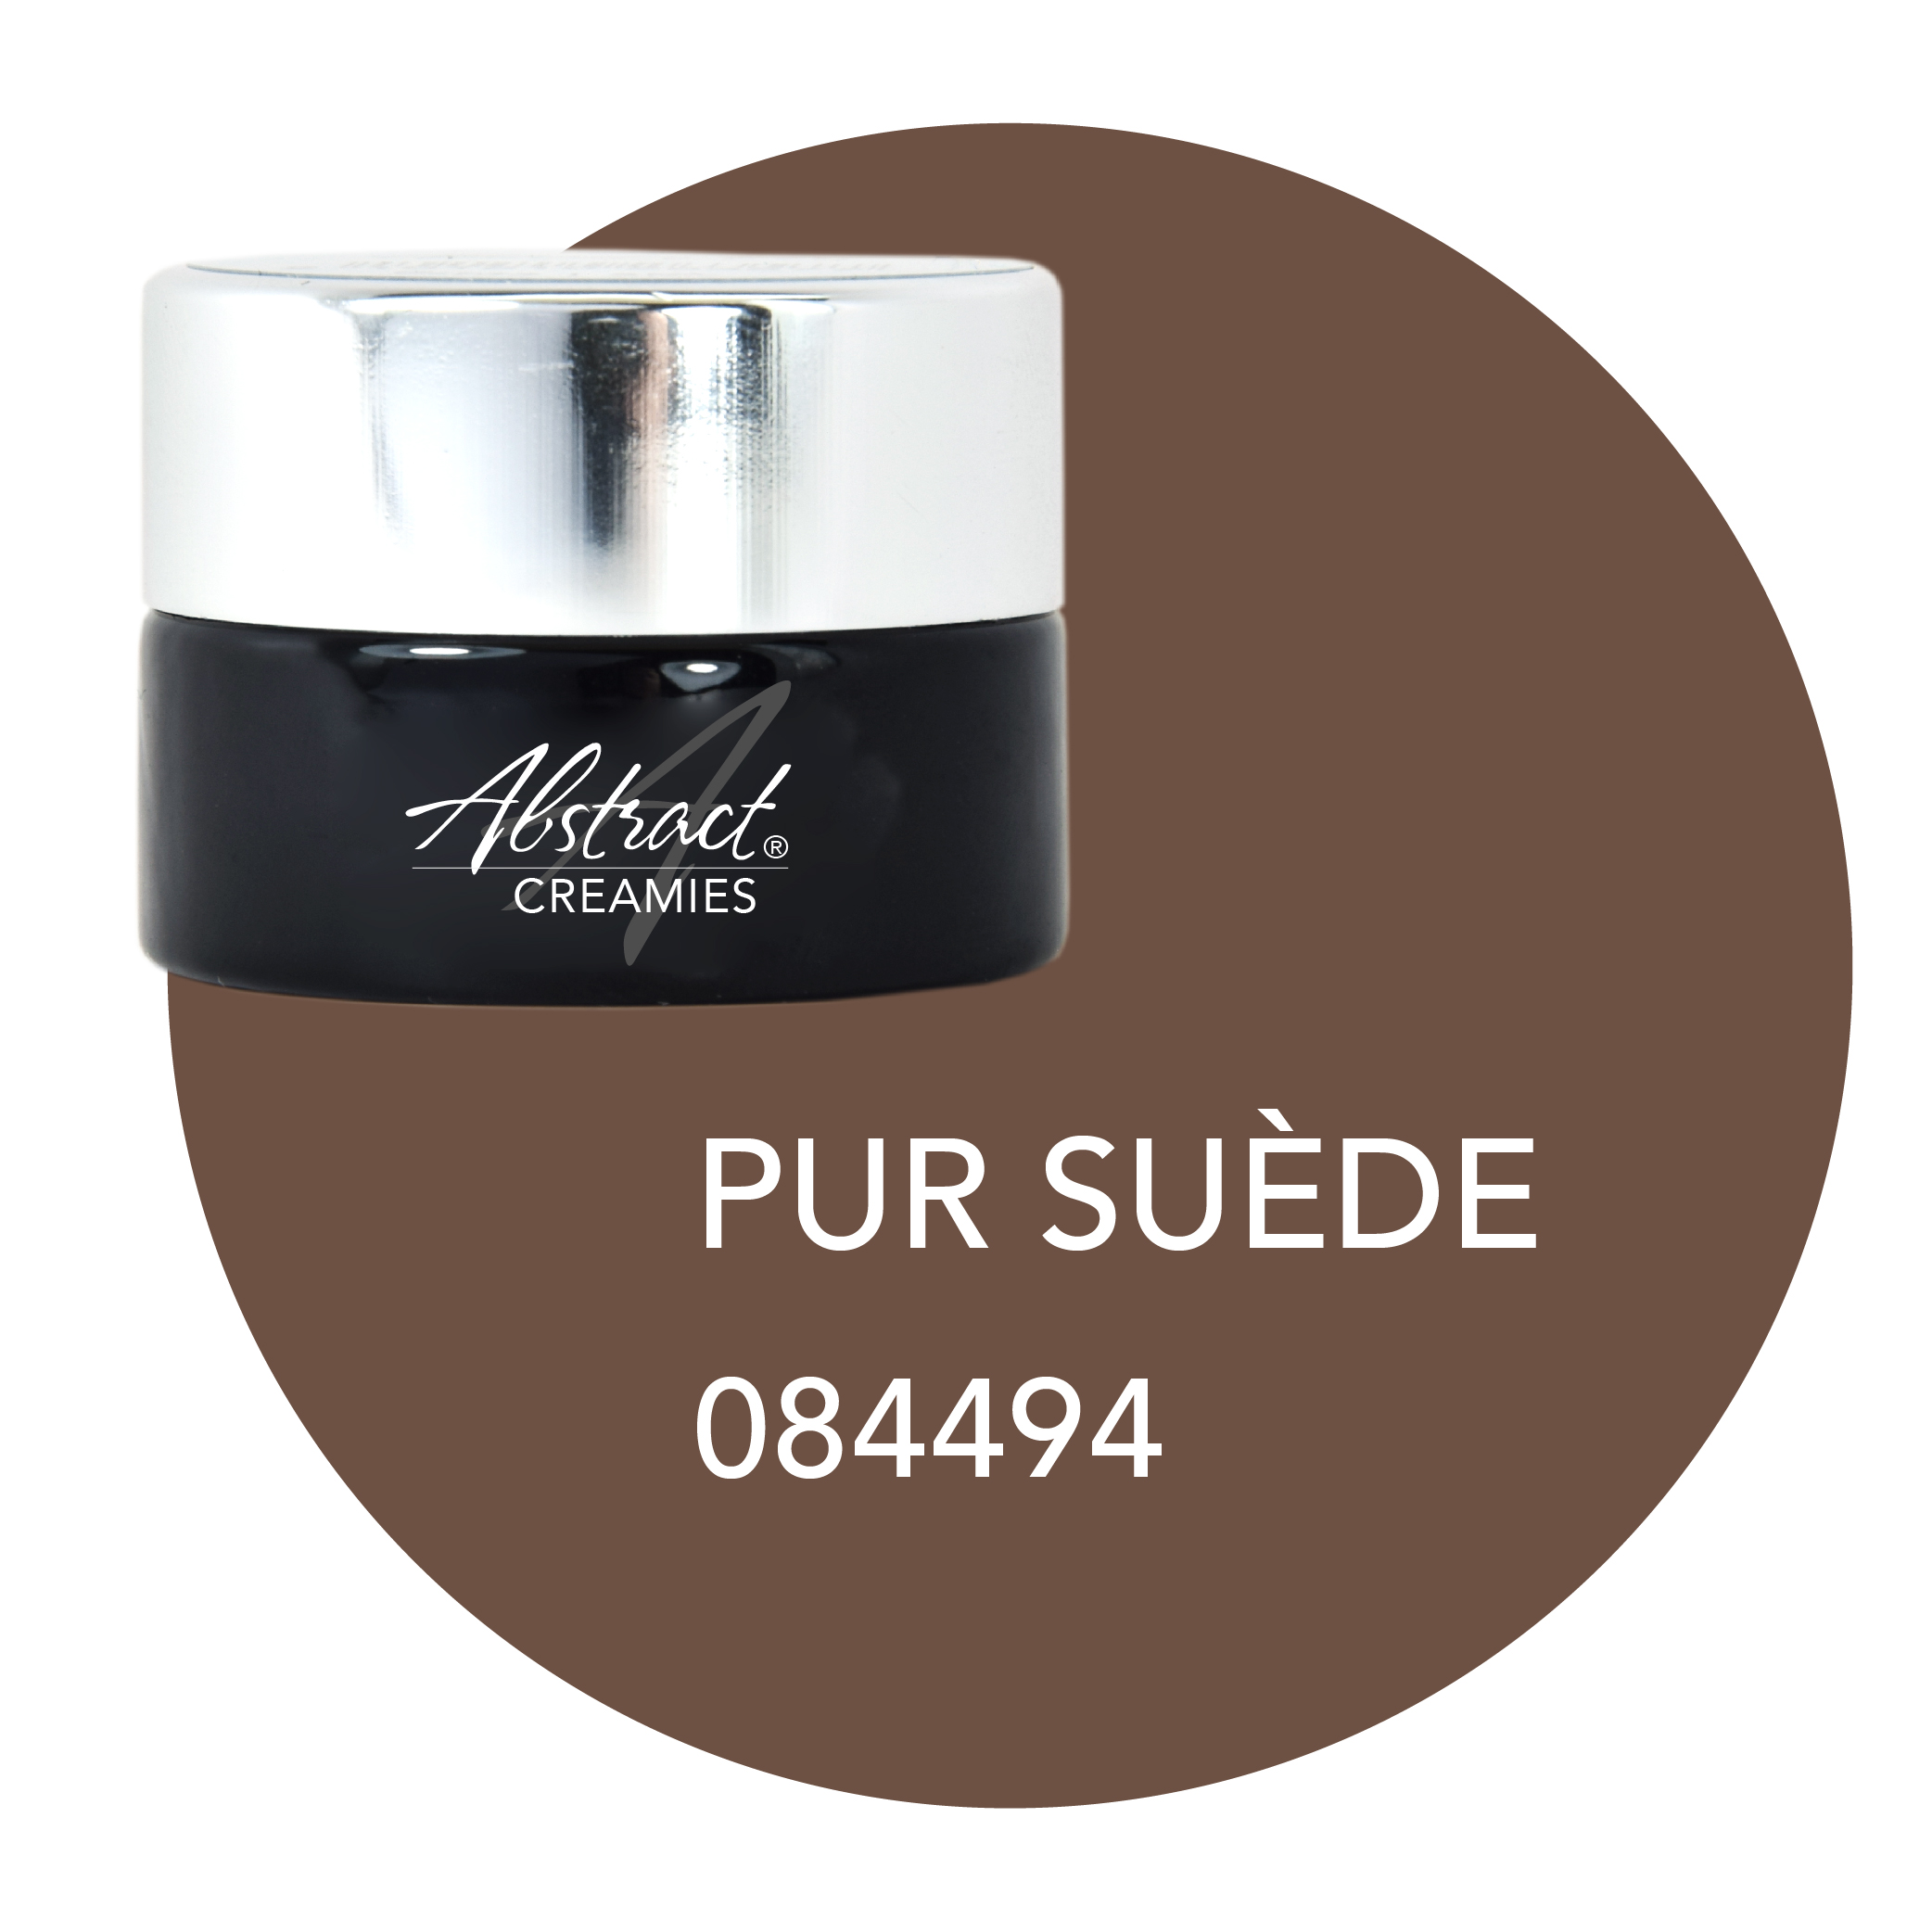 Pur Suede 5ml Creamies (Nude 2 Bold), Abstract | 084494